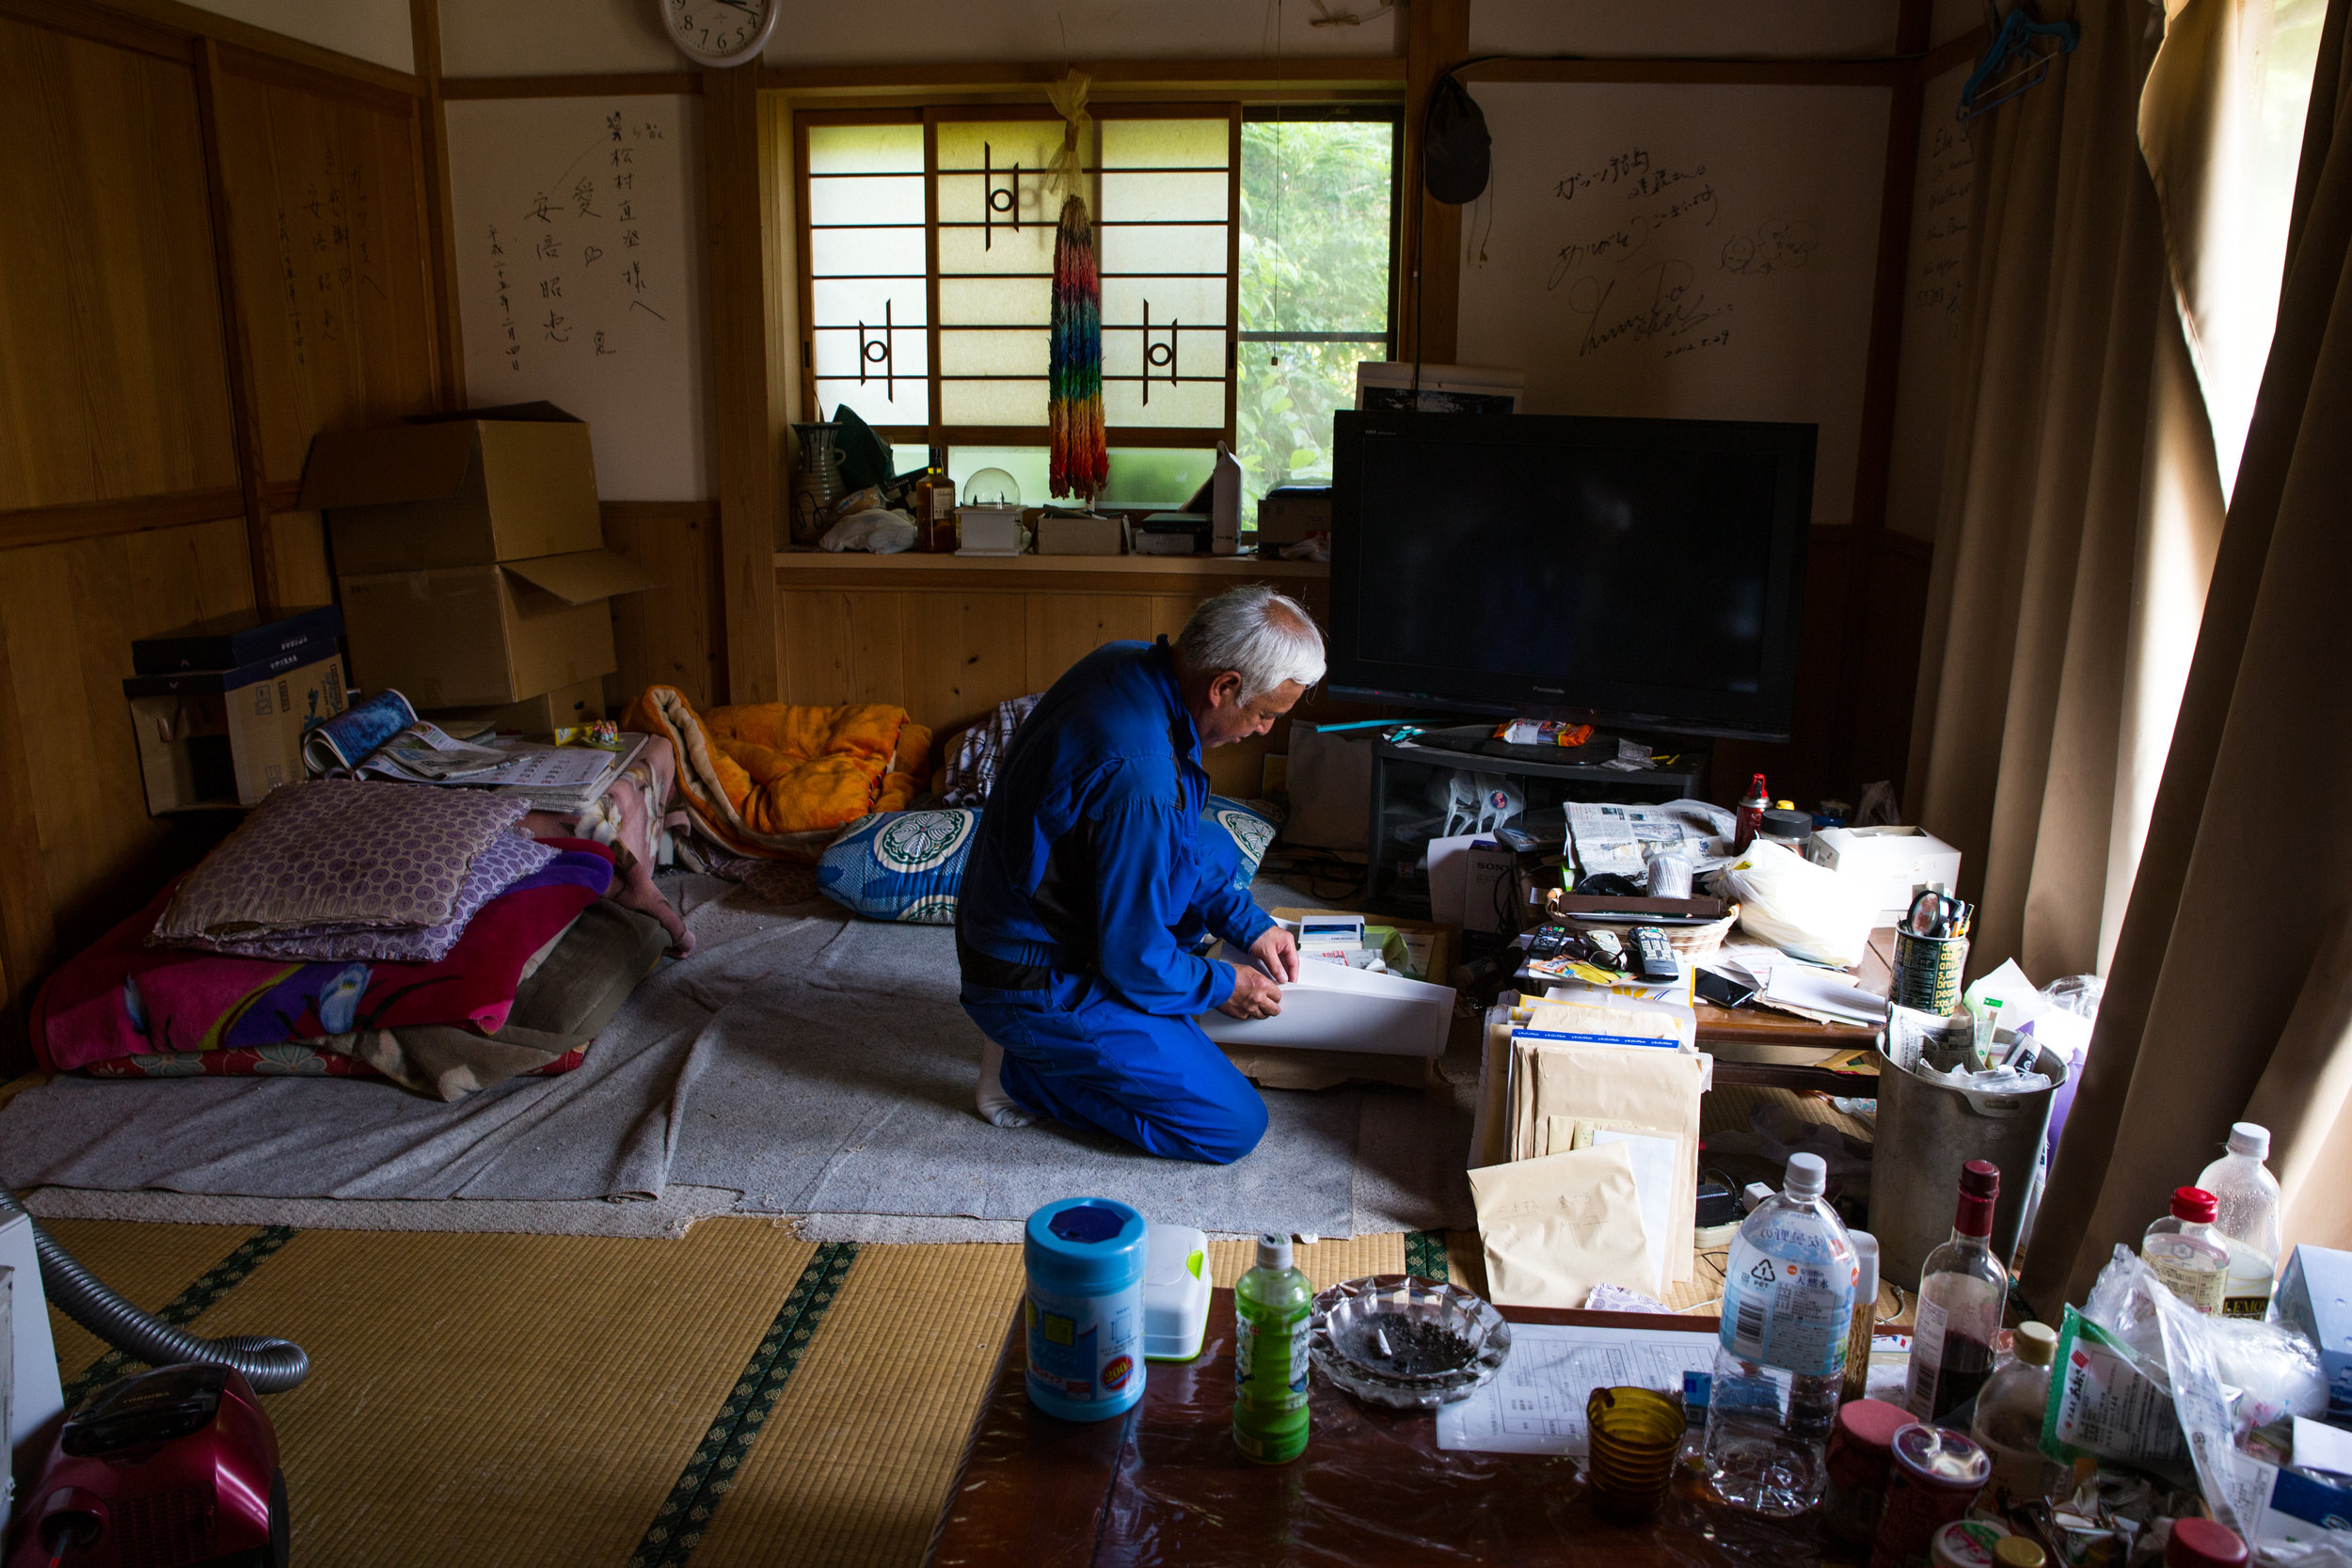  Matsumura wears a bright blue jumpsuit and smokes 30 cigarettes a day. His house is filled with bottles of whiskey and beer, packaged food, piles of paper and a collection of cranes from an anti-nuclear rally in France. 